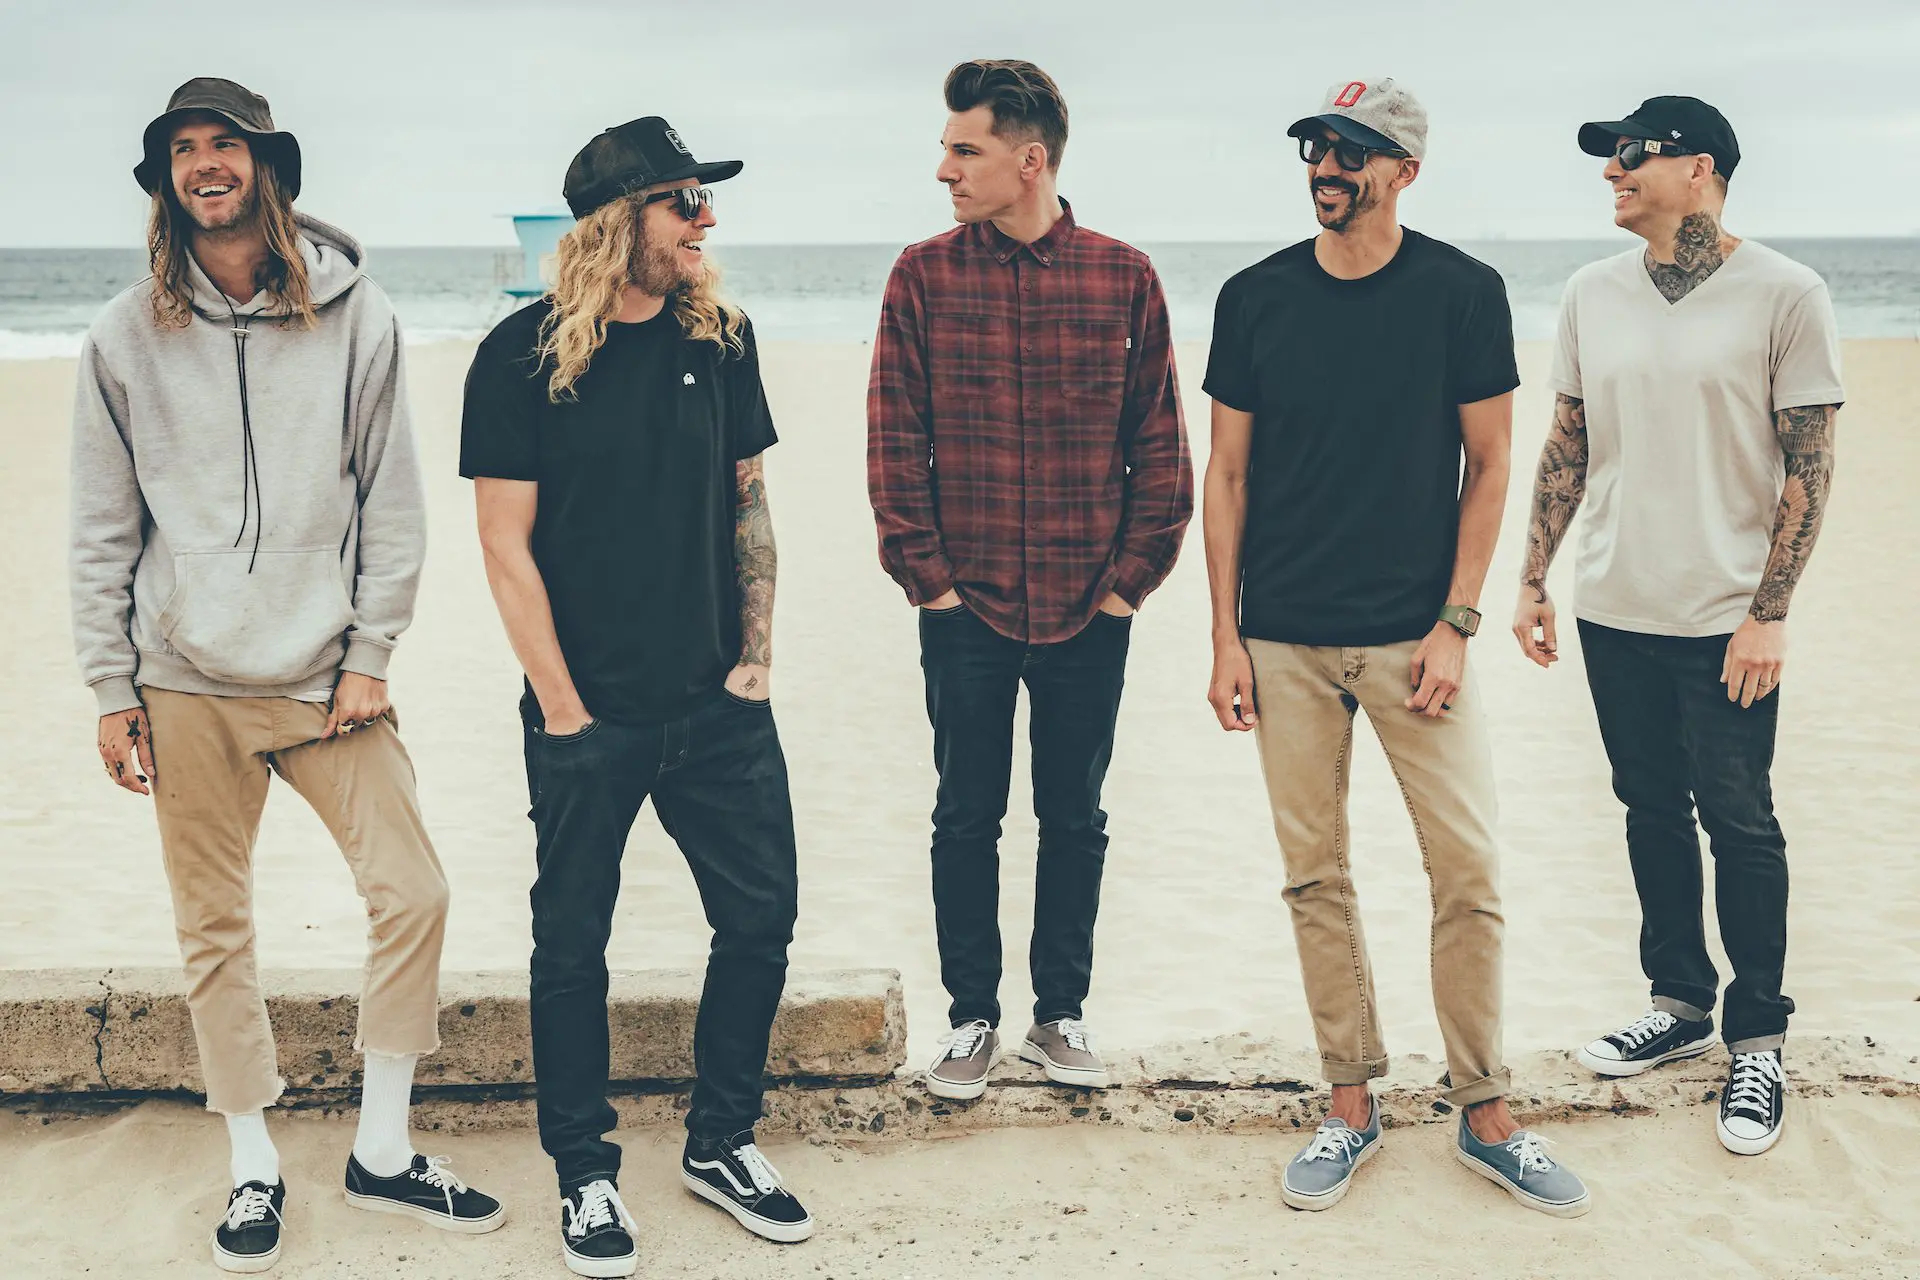 DIRTY HEADS – ascolta il nuovo singolo “Life’s Been Good”